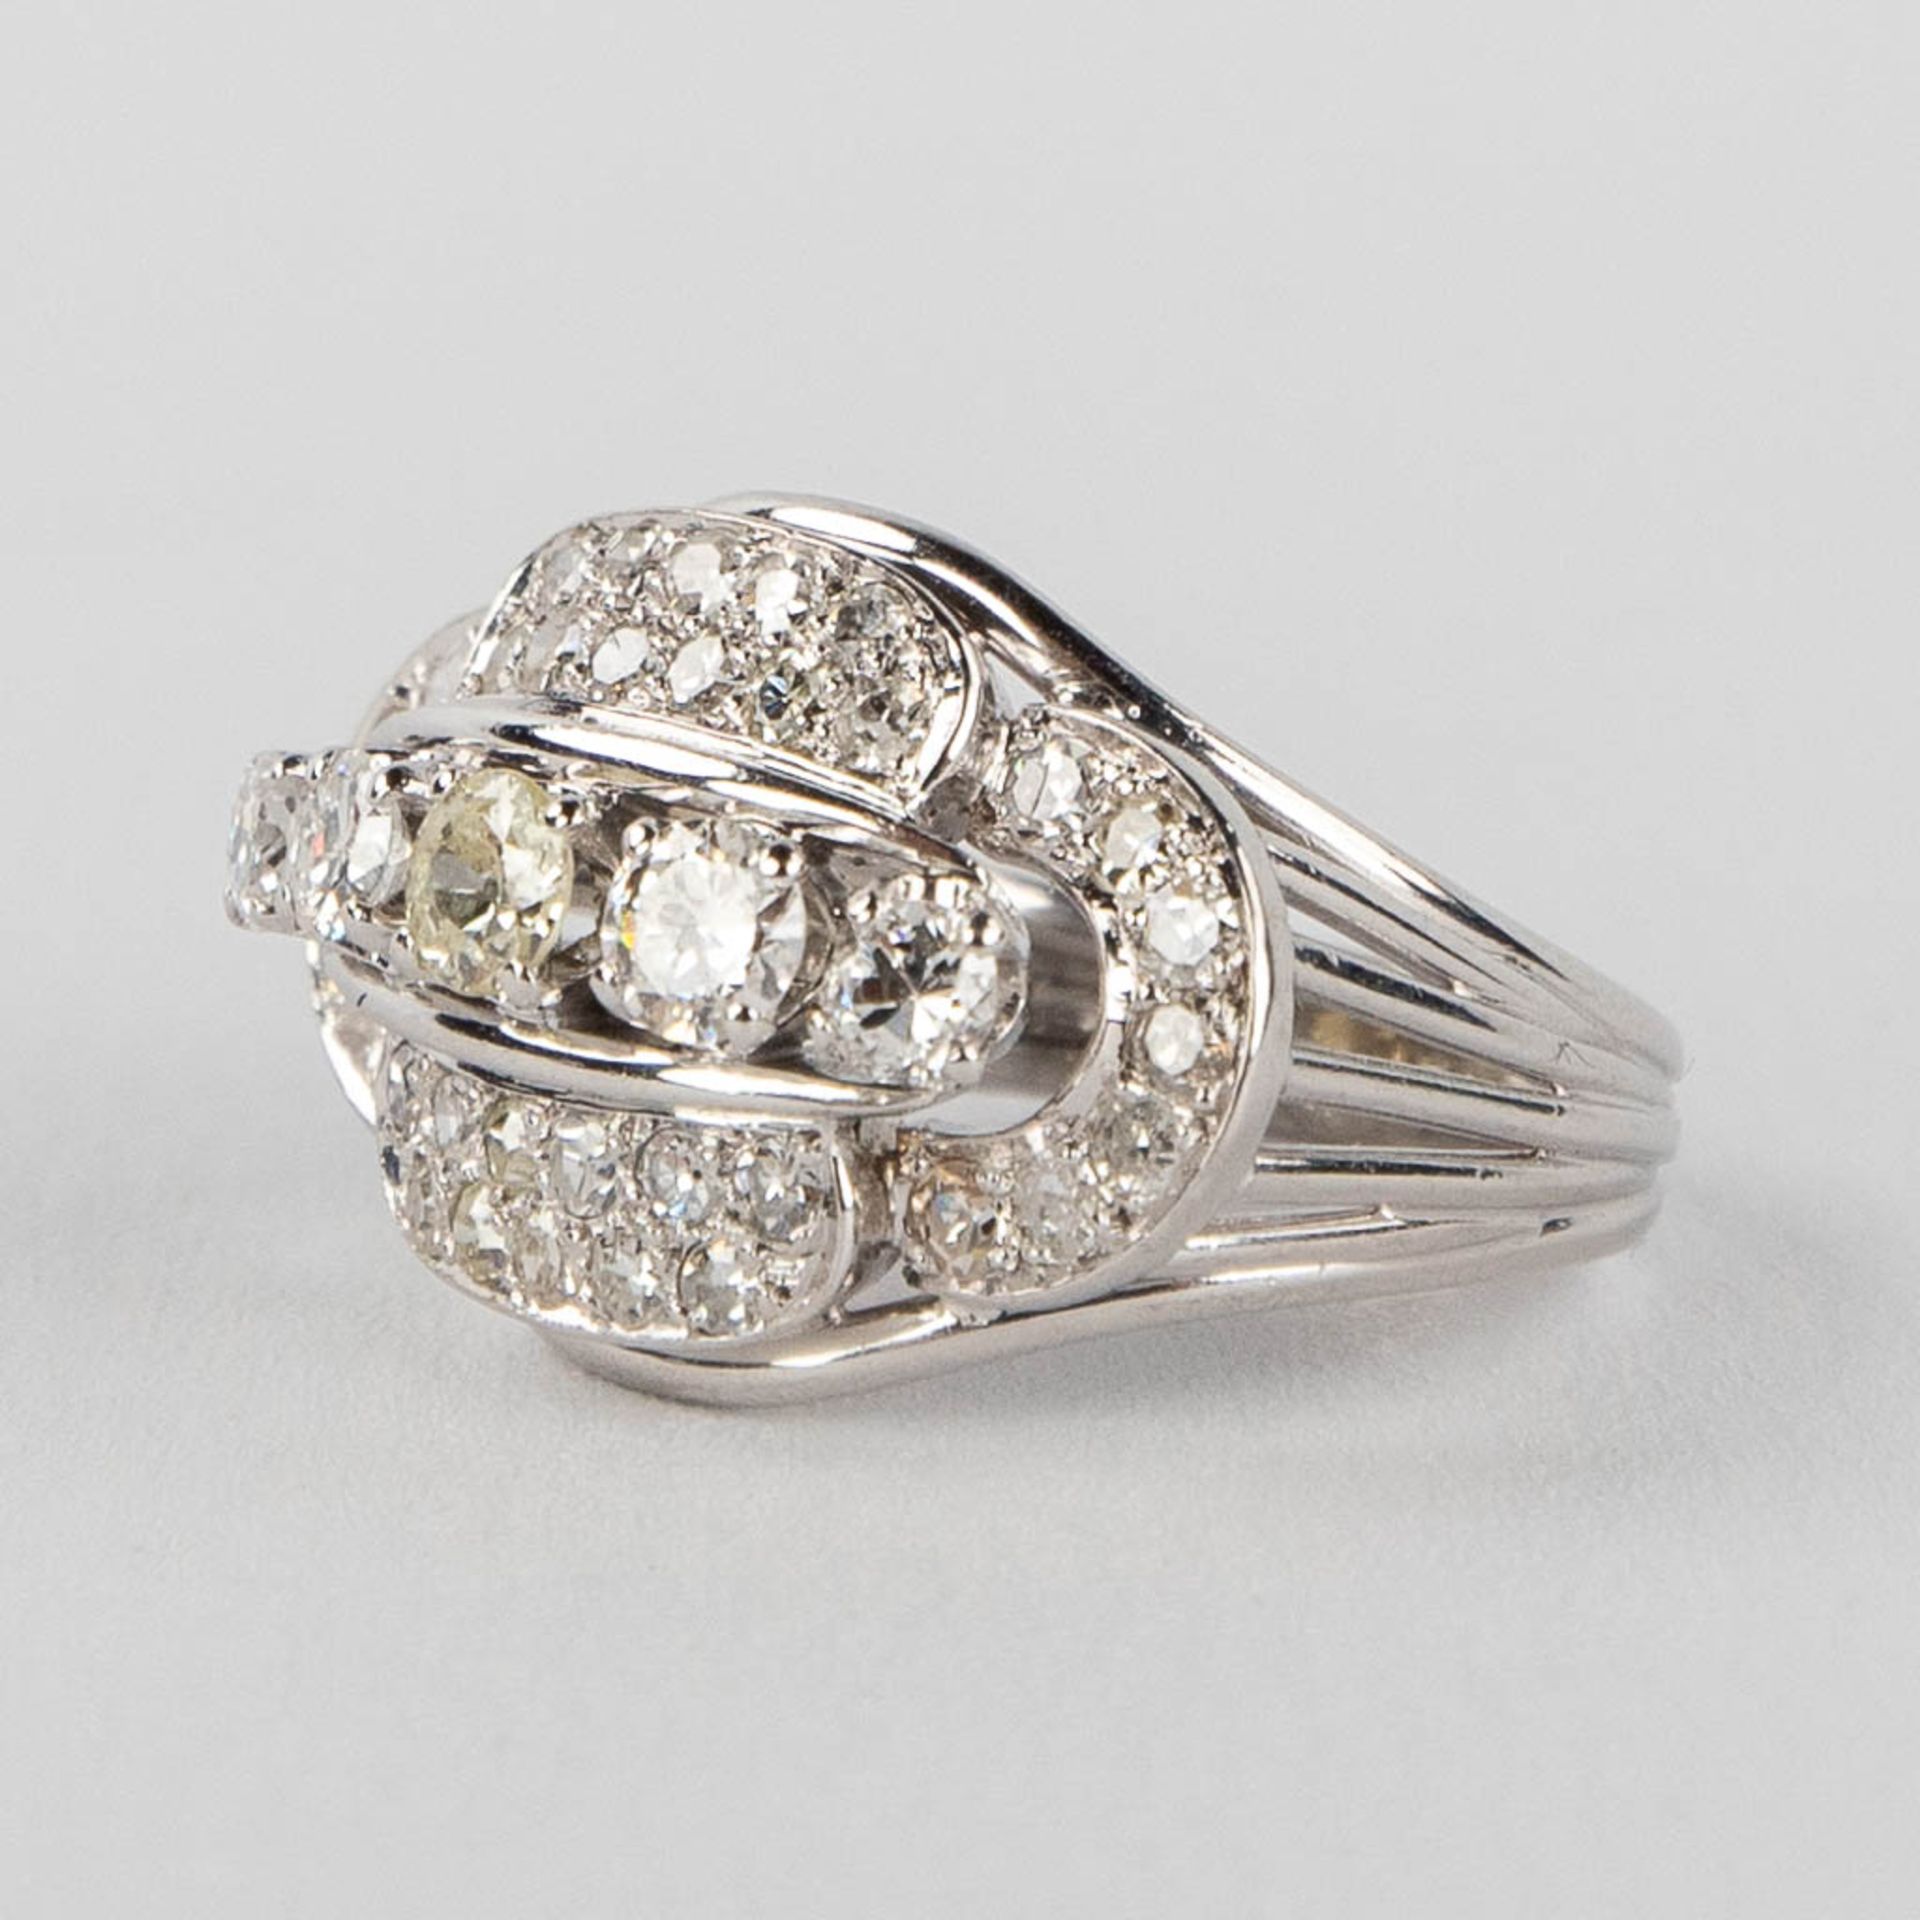 An antique ring with 5 larger and 36 smaller brilliants, in a platinum ring. 9,57g. size: 53 - Image 6 of 12